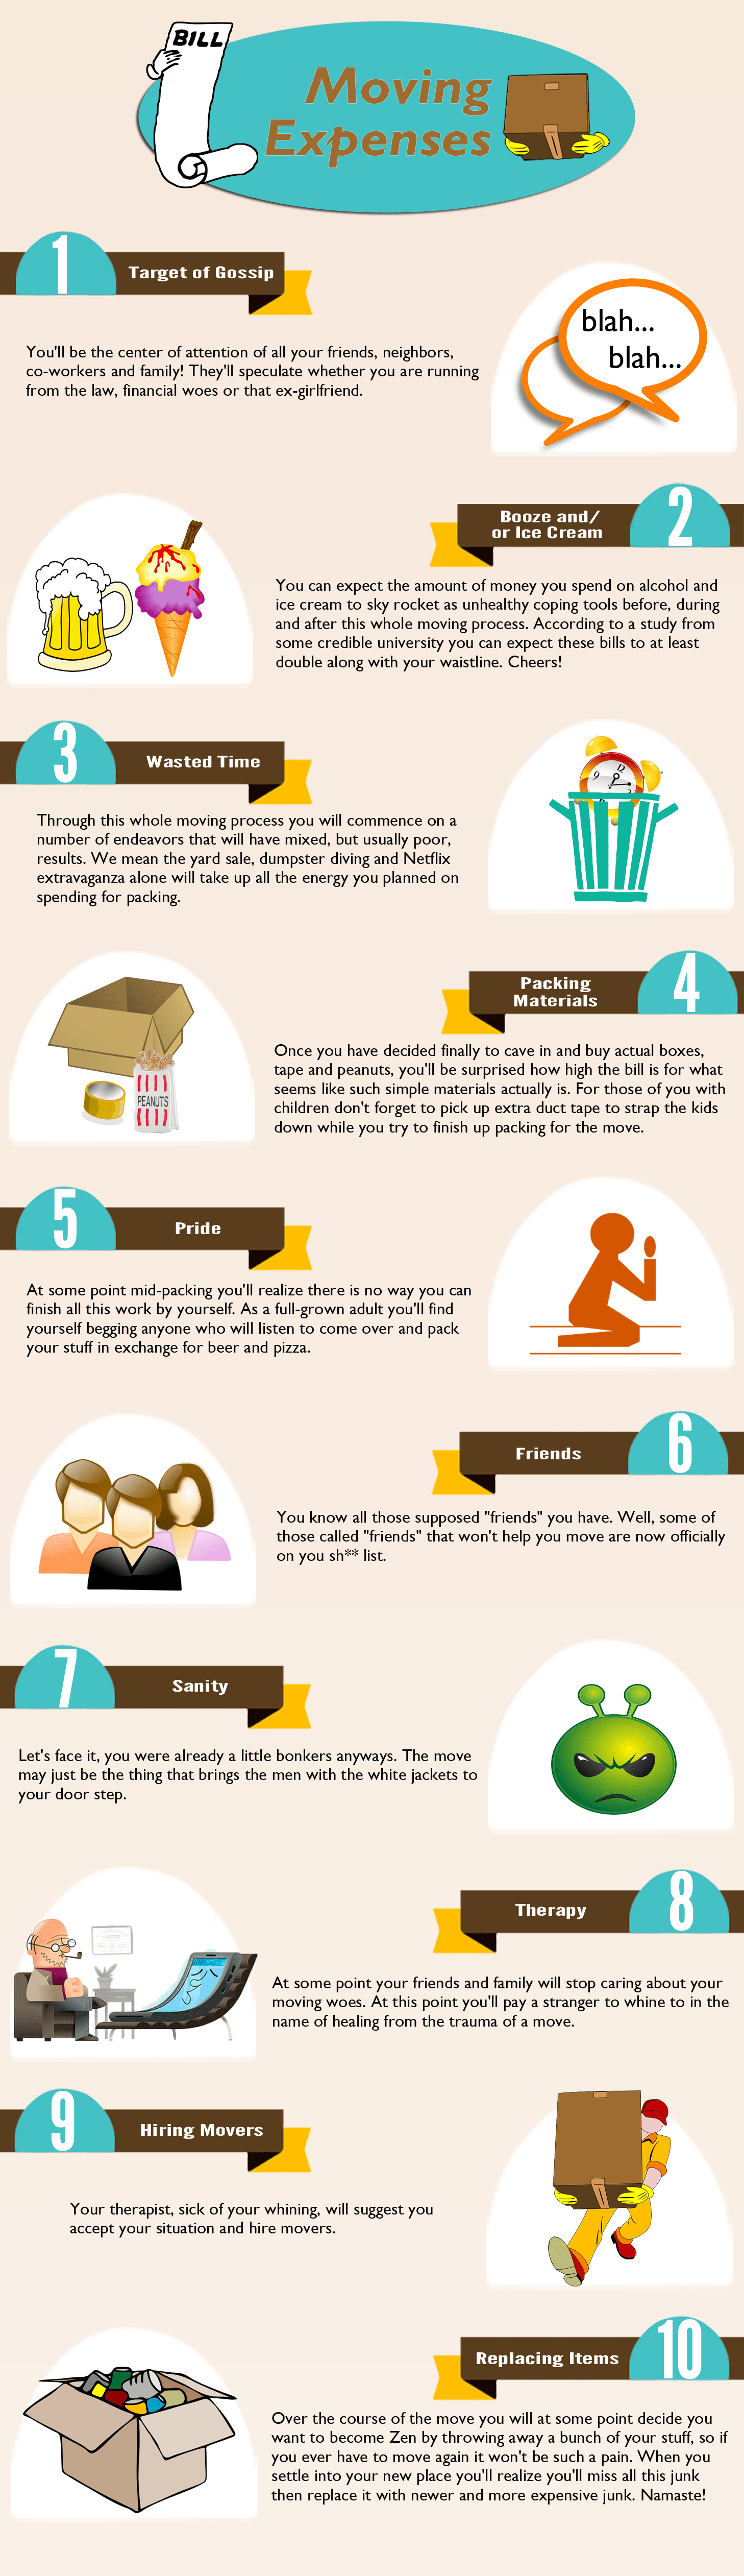 moving expenses infographic